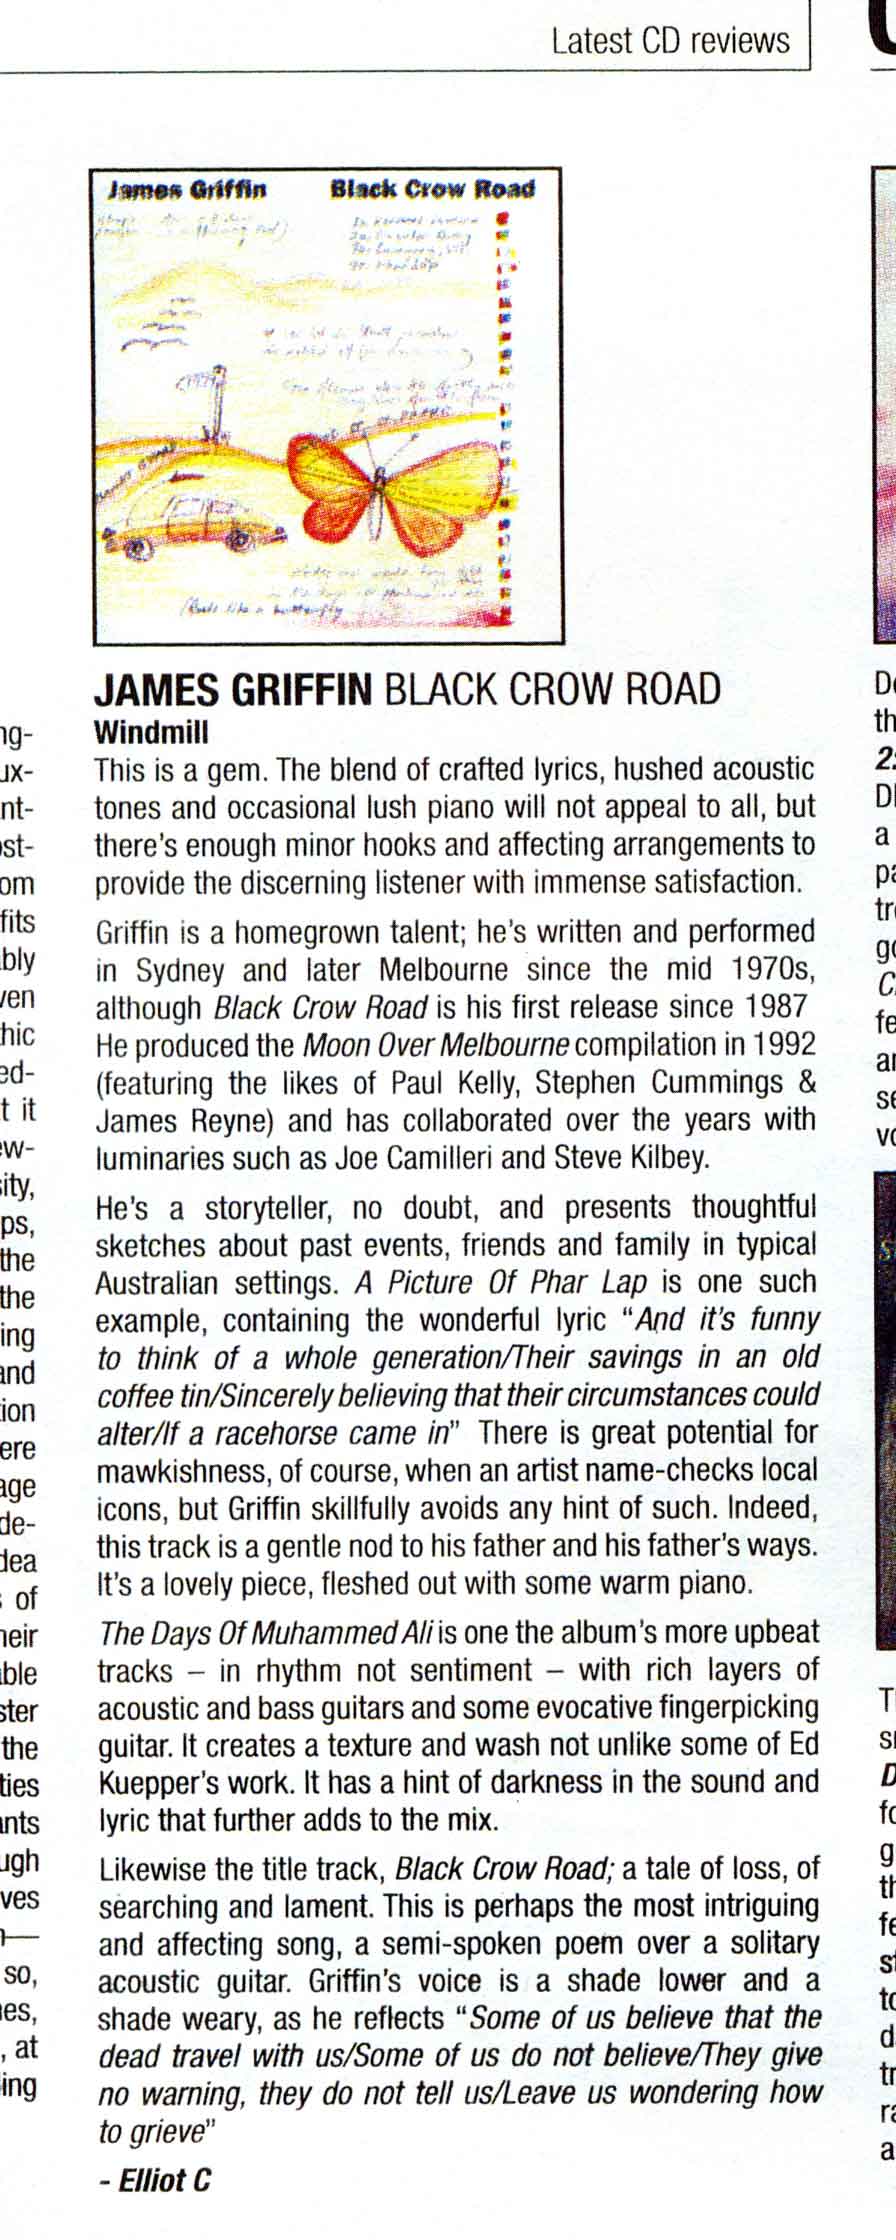 Review of Black Crow Road